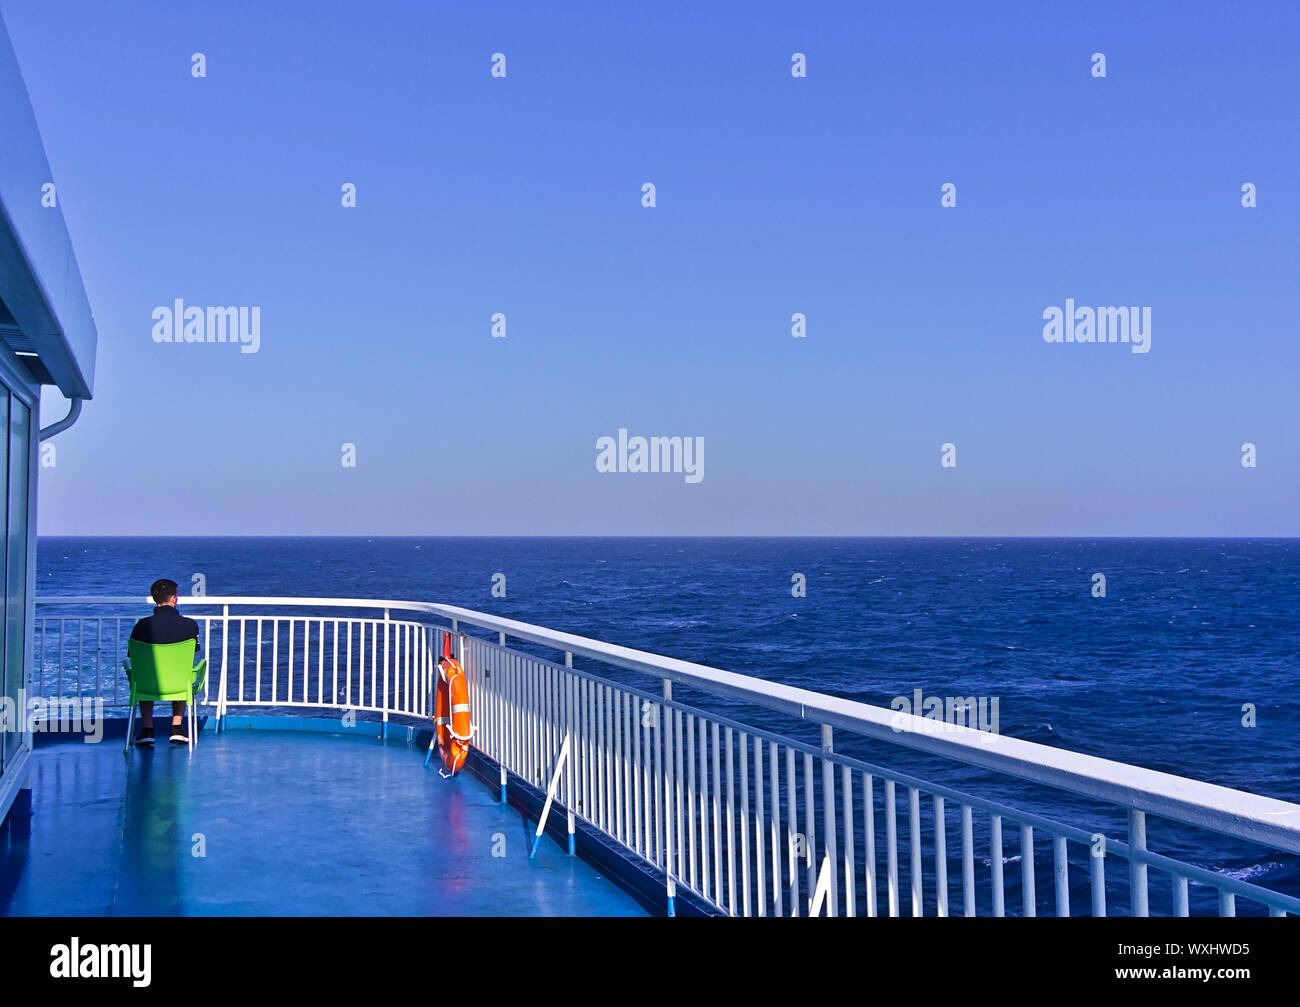 Man sitting on plastic chair on a ship deck while sailing in open sea. Stock Photo